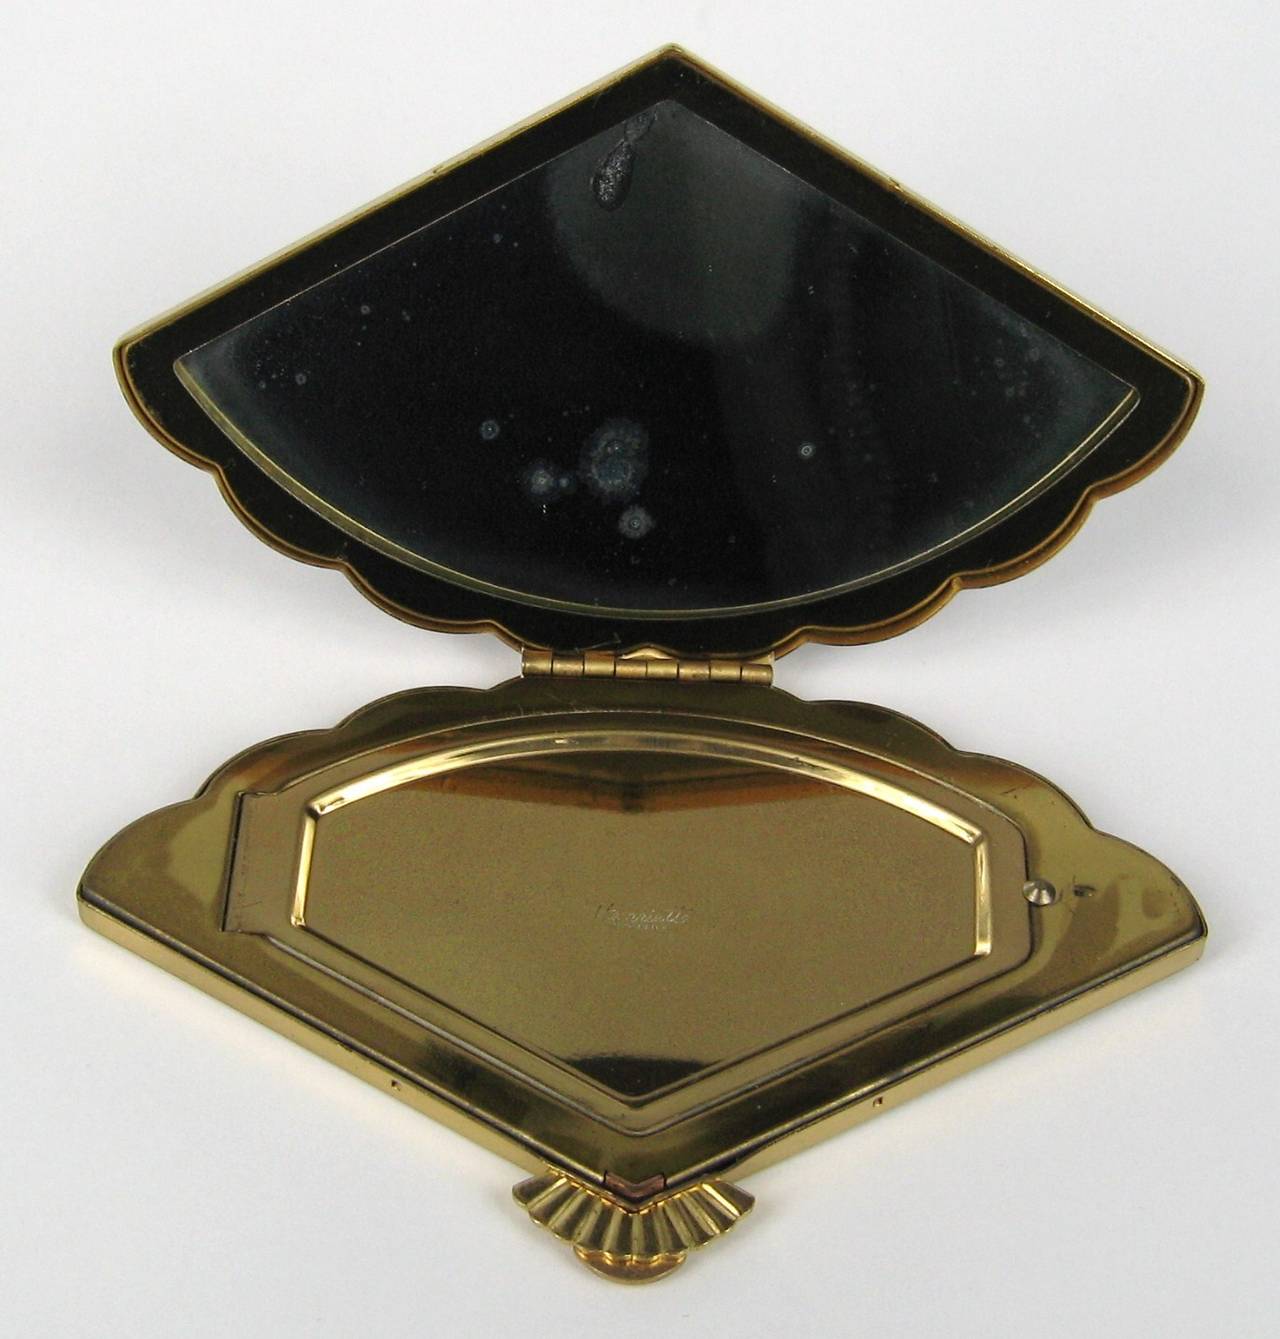 Women's or Men's Vintage 1950s Henriette Gold tone Metal Fan Shaped Compact New, Never Used 